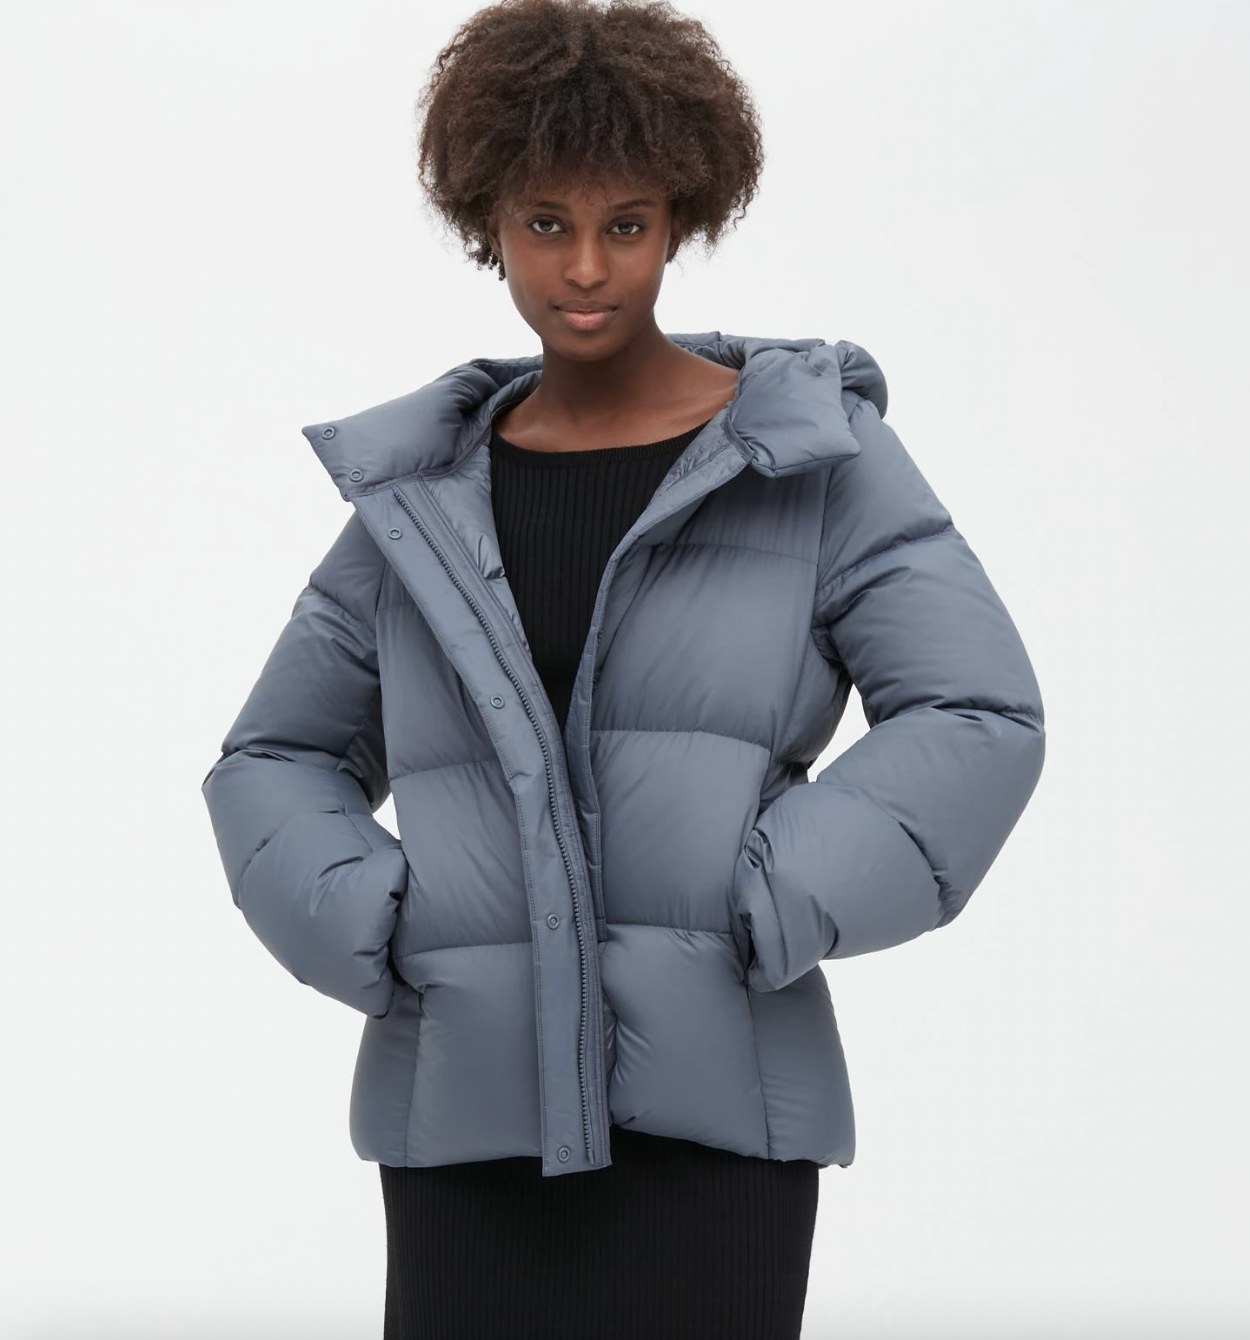 21 Winter Jackets Under $100 To Add To Your Wardrobe